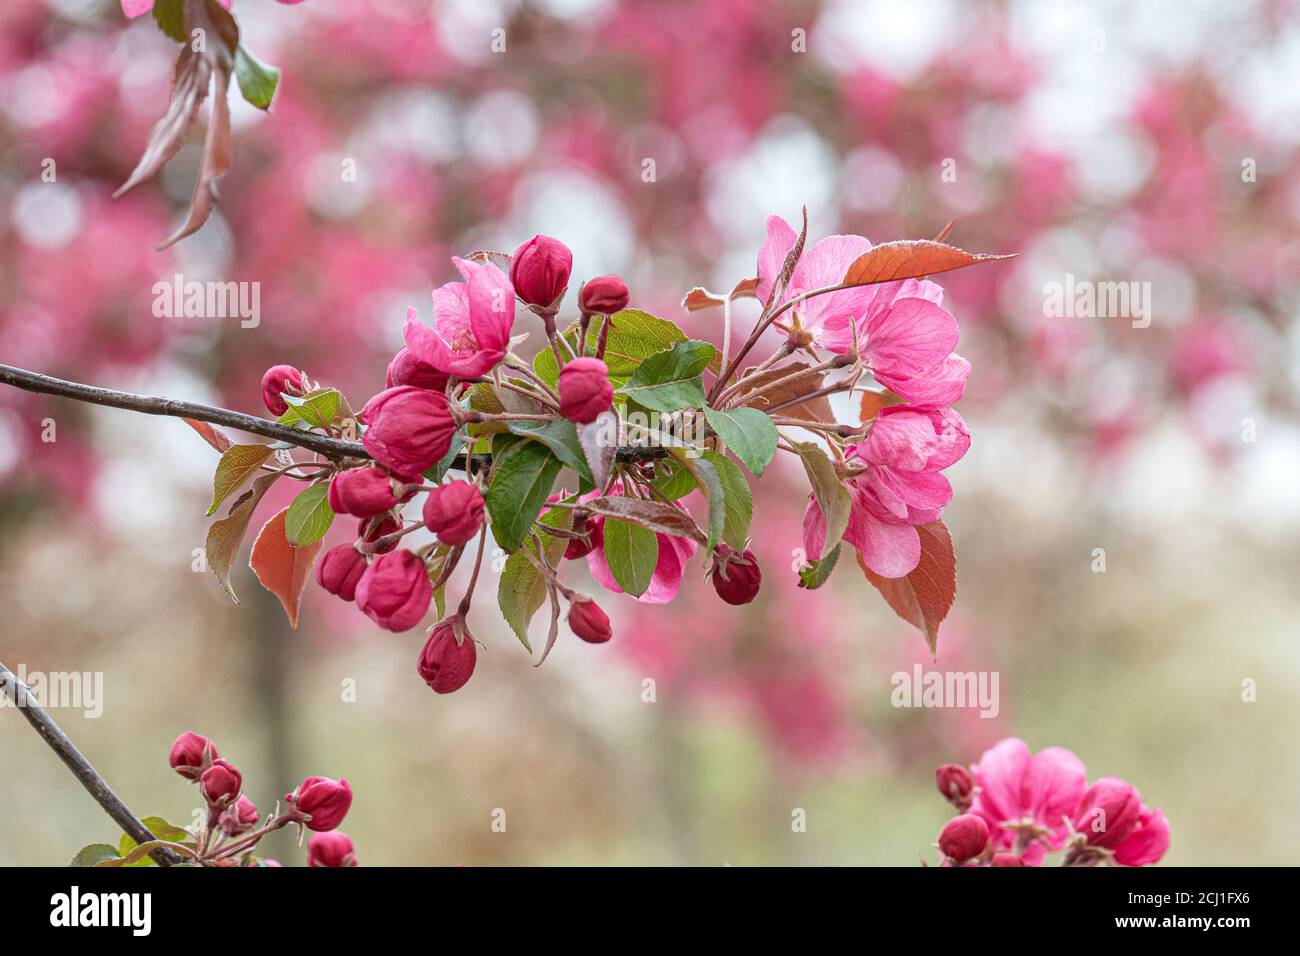 Ornamental apple tree (Malus 'Rudolph', Malus Rudolph), blooming branch of cultivar Rudolph Stock Photo